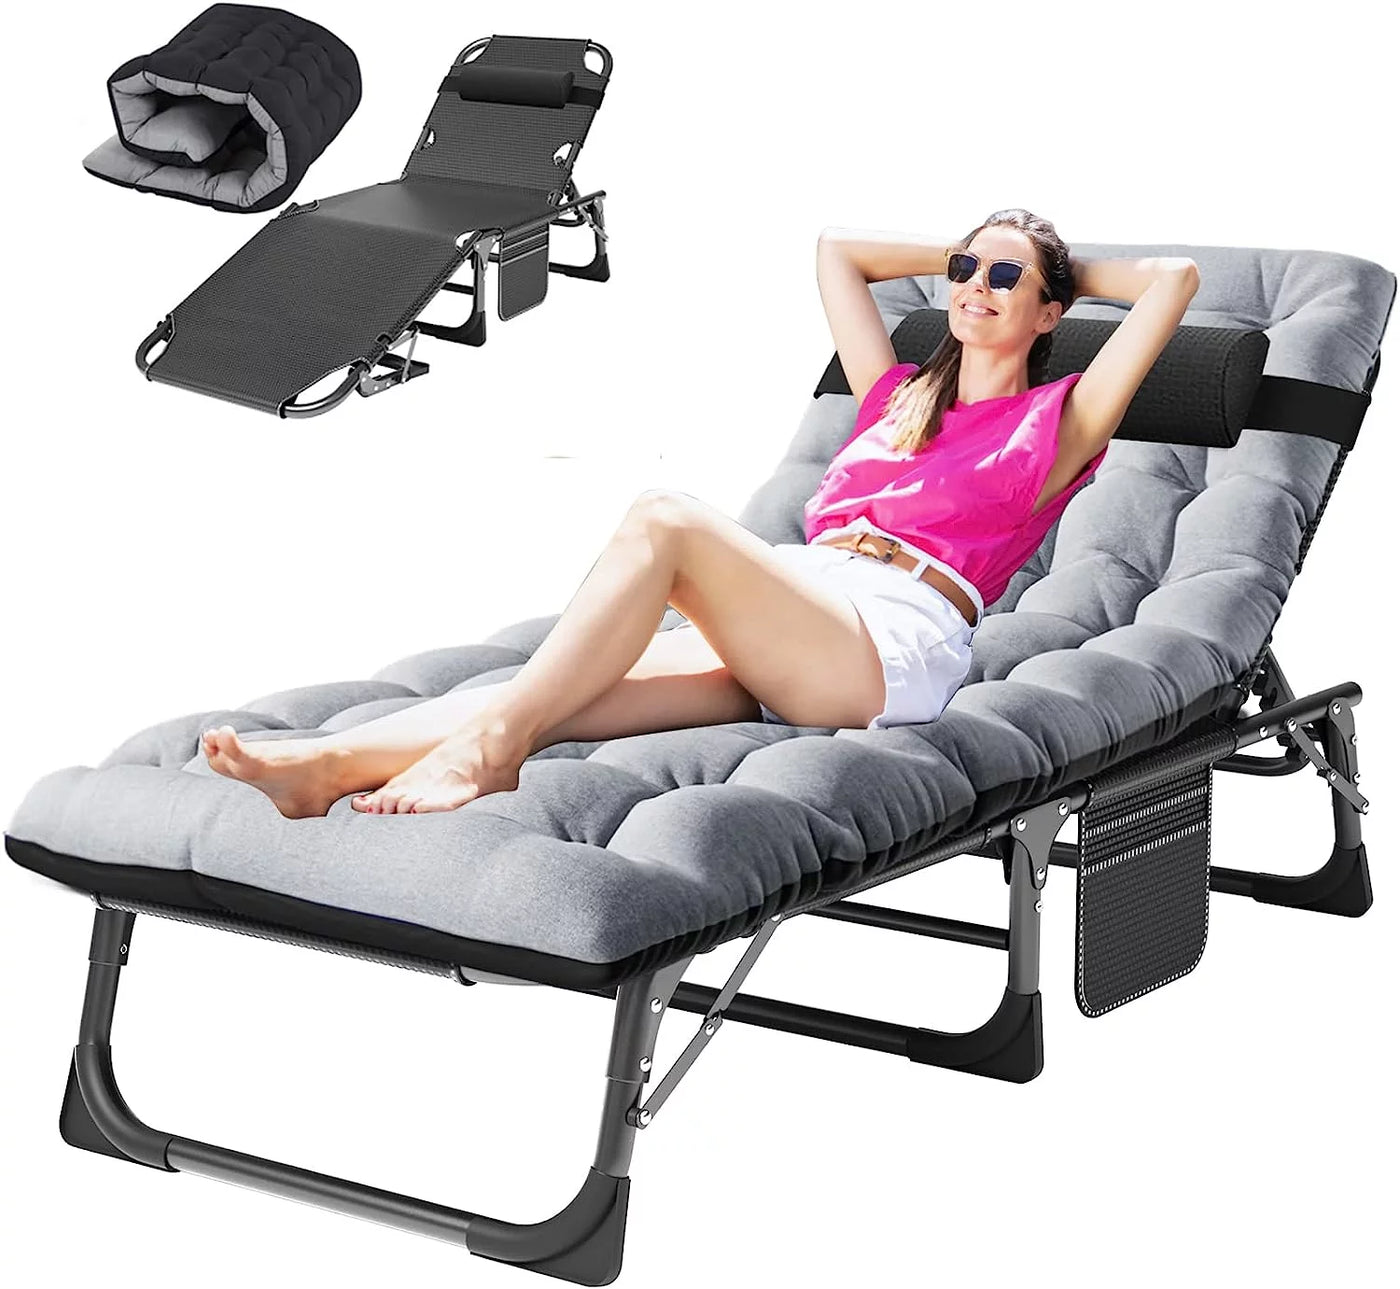 5 Position Folding Lounge Chair - Adjustable, Multi-Use Reclining Chair